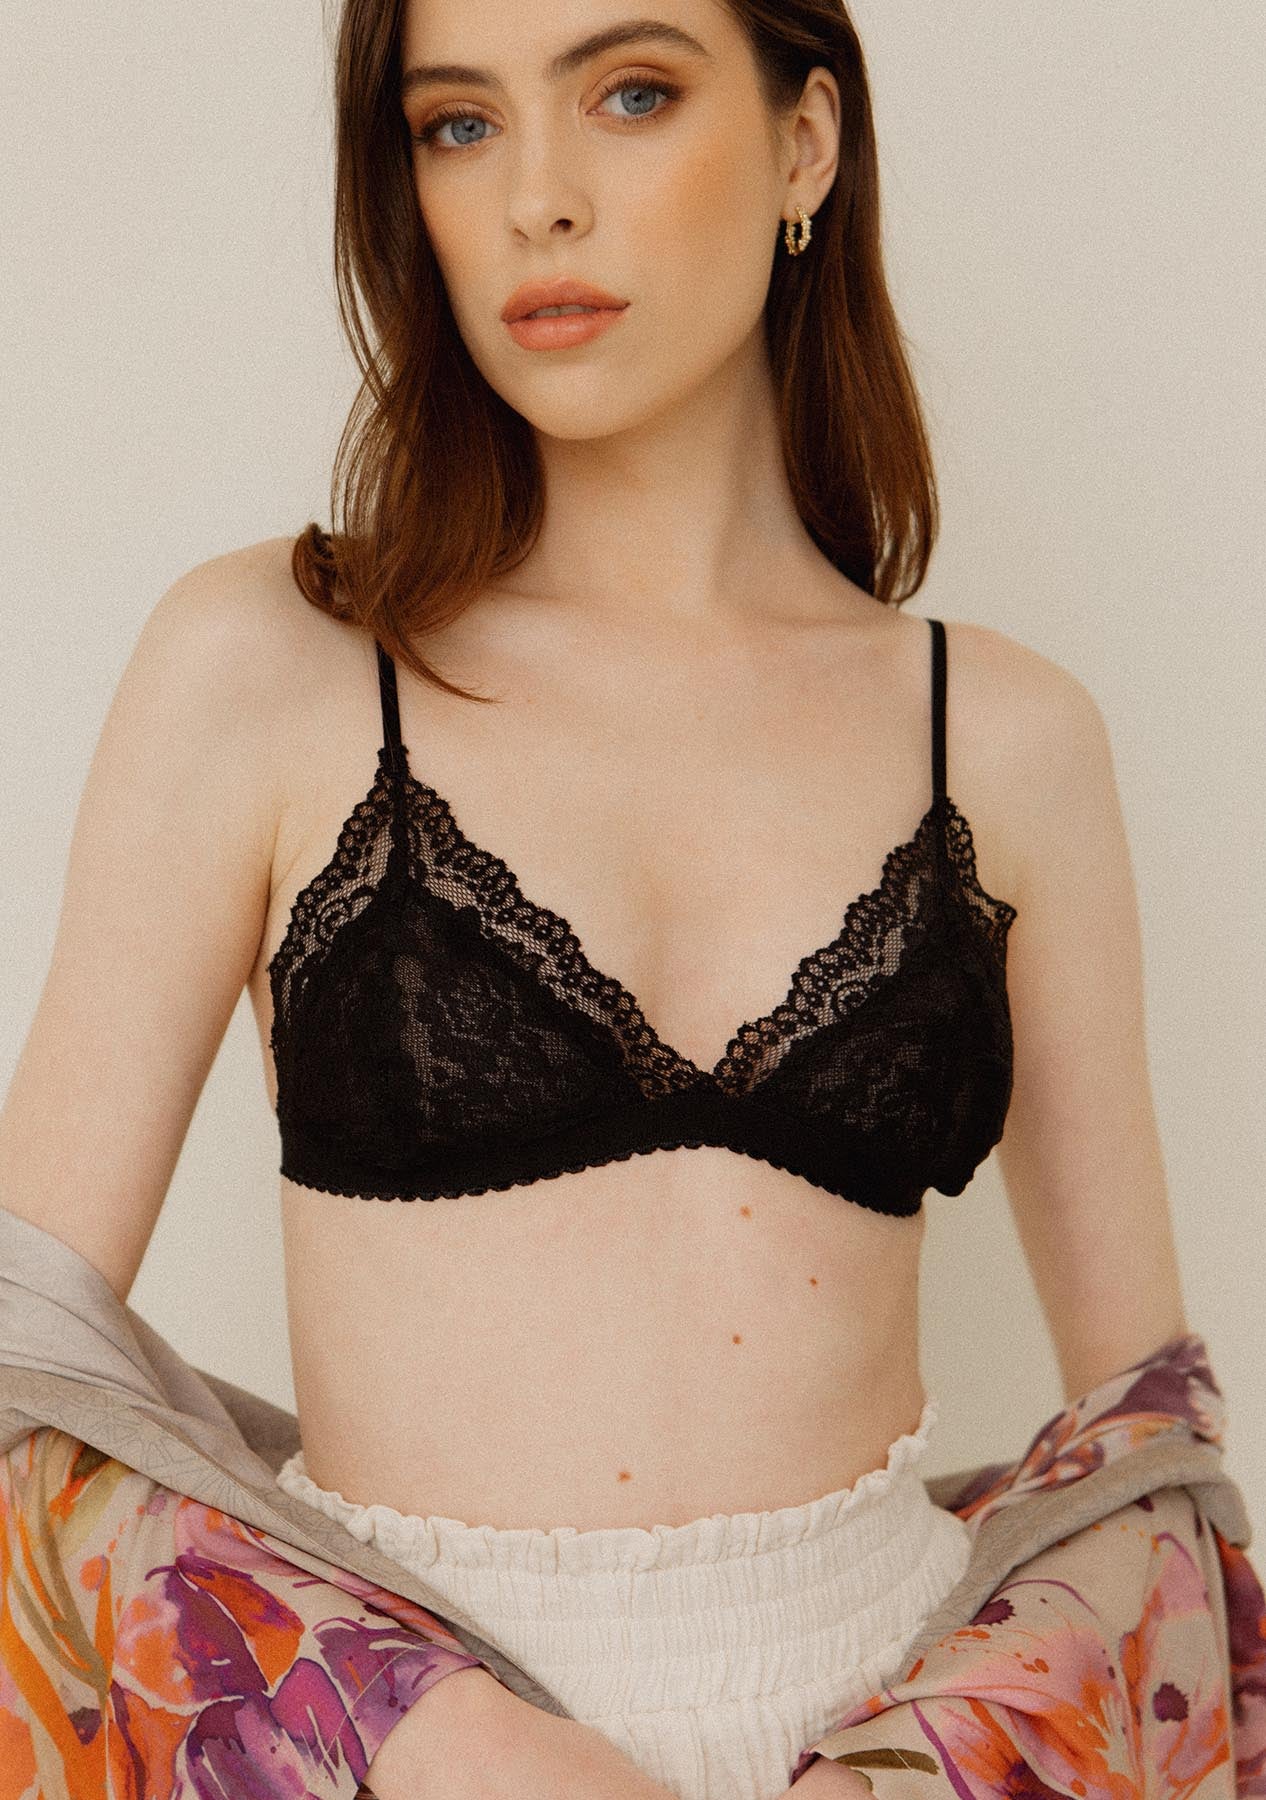 Naked Scoop Bra - Clay curated on LTK